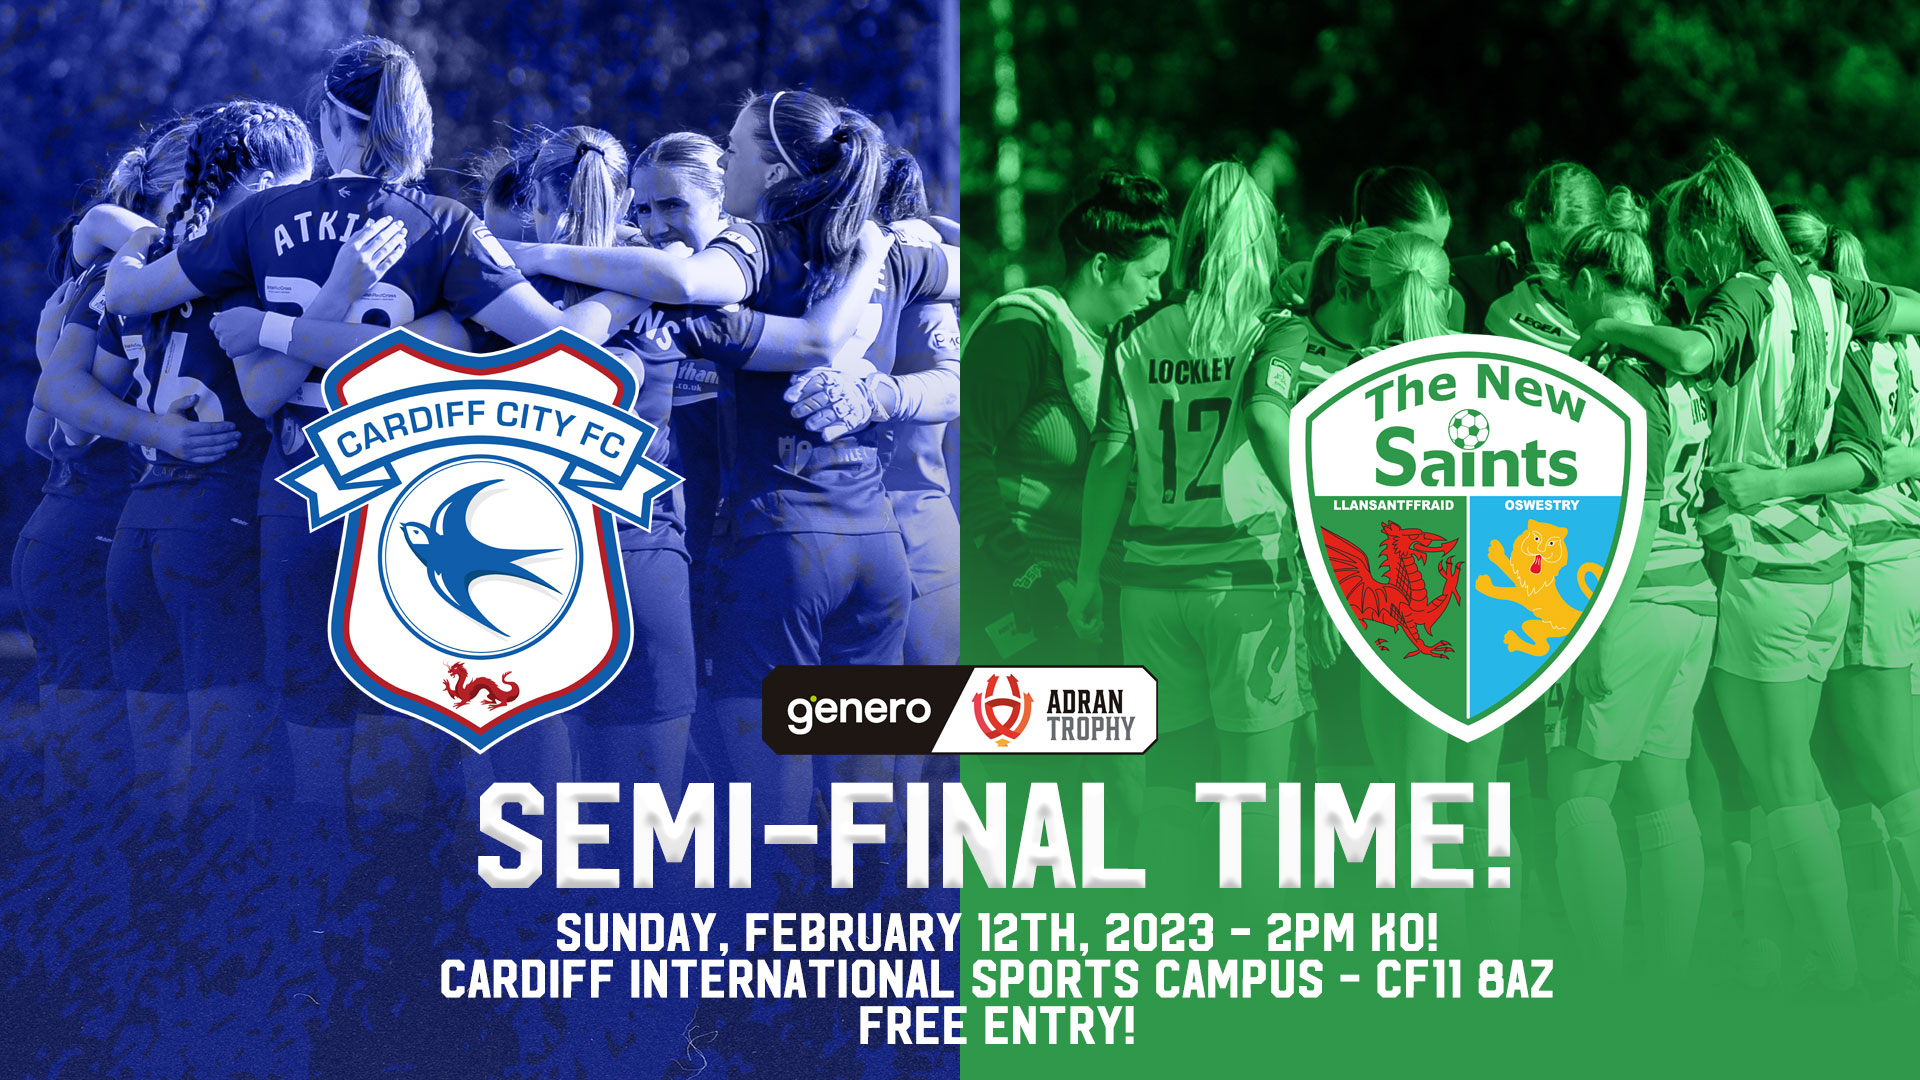 The Bluebirds host TNS on Sunday in the Adran Trophy Semi-Finals...